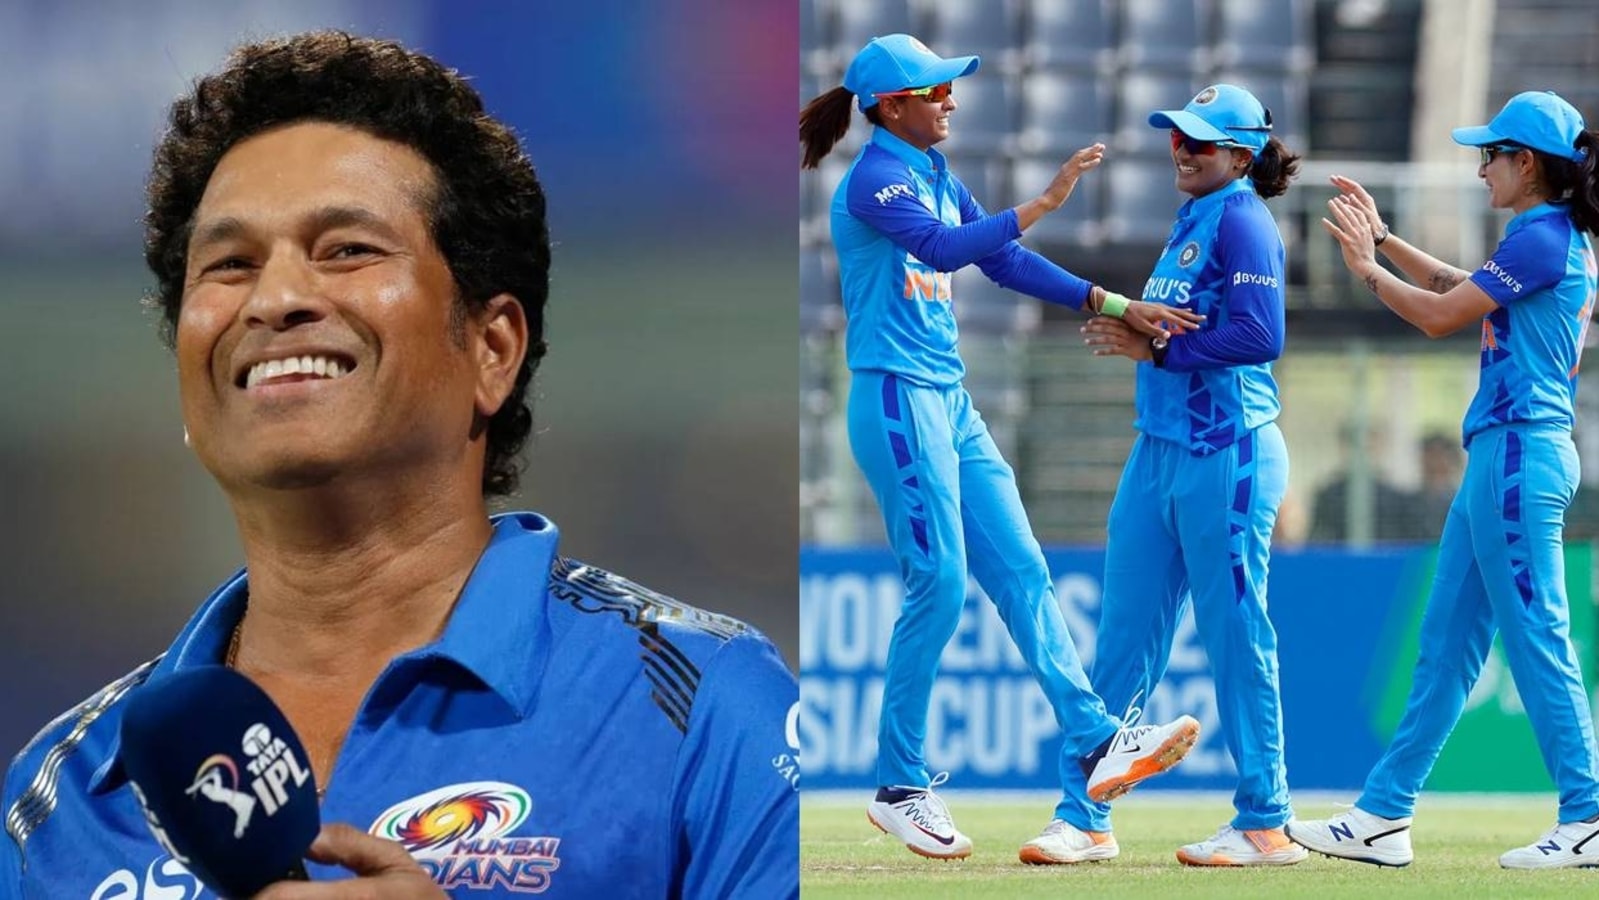 india-paving-the-way-forward-sachin-tendulkar-leads-india-greats-reactions-to-bcci-s-historic-equal-pay-announcement